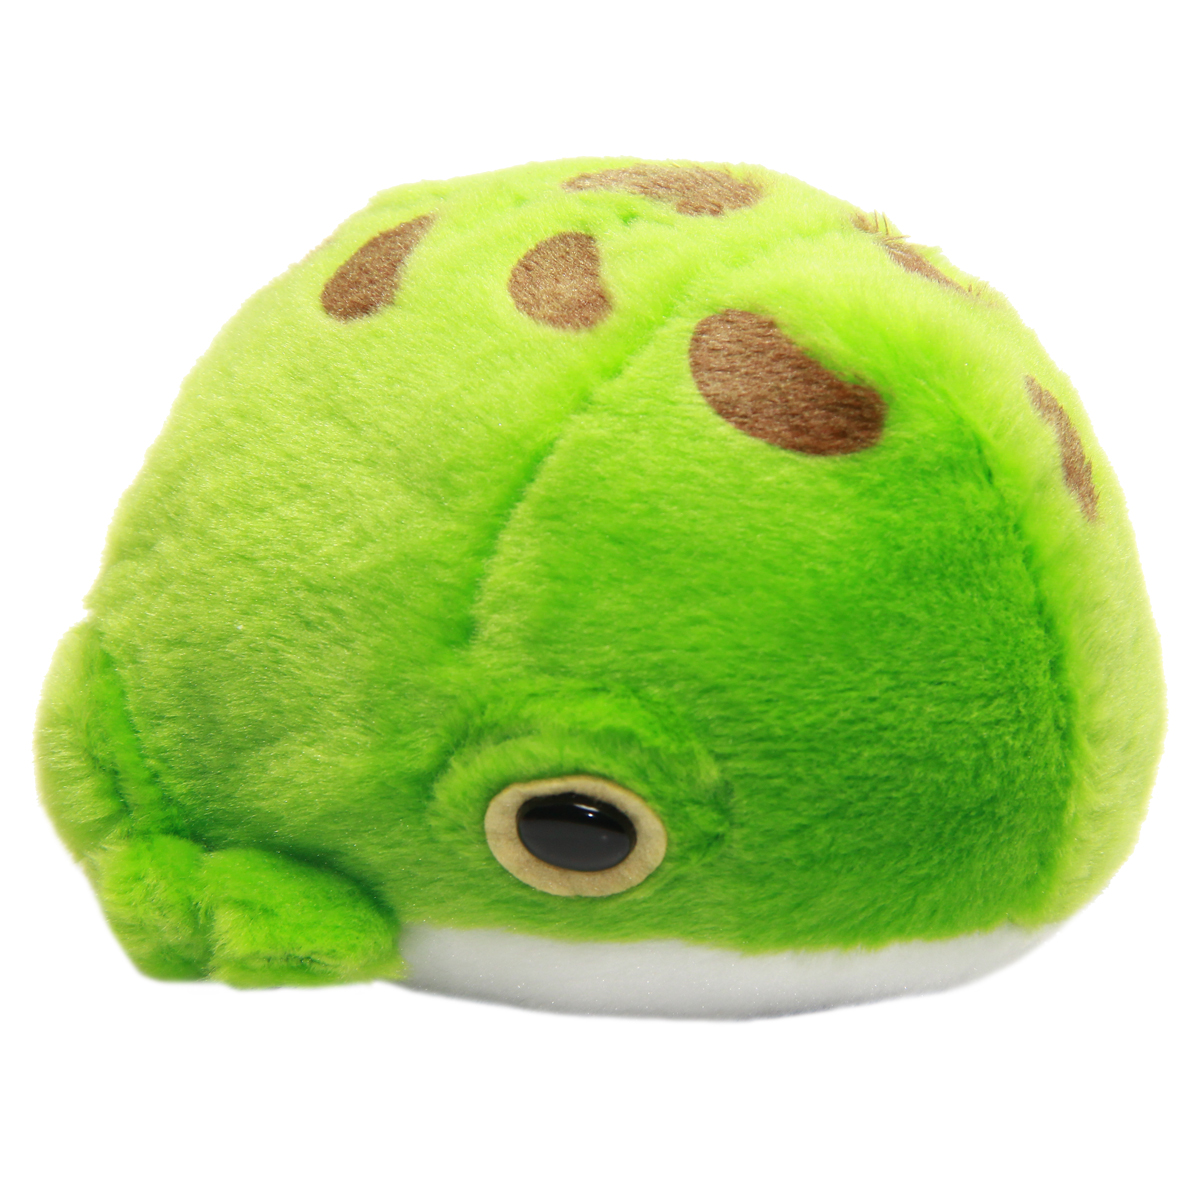 Frog Plushie Super Soft Squishy Stuffed Animal Toy Green Size 5 Inches